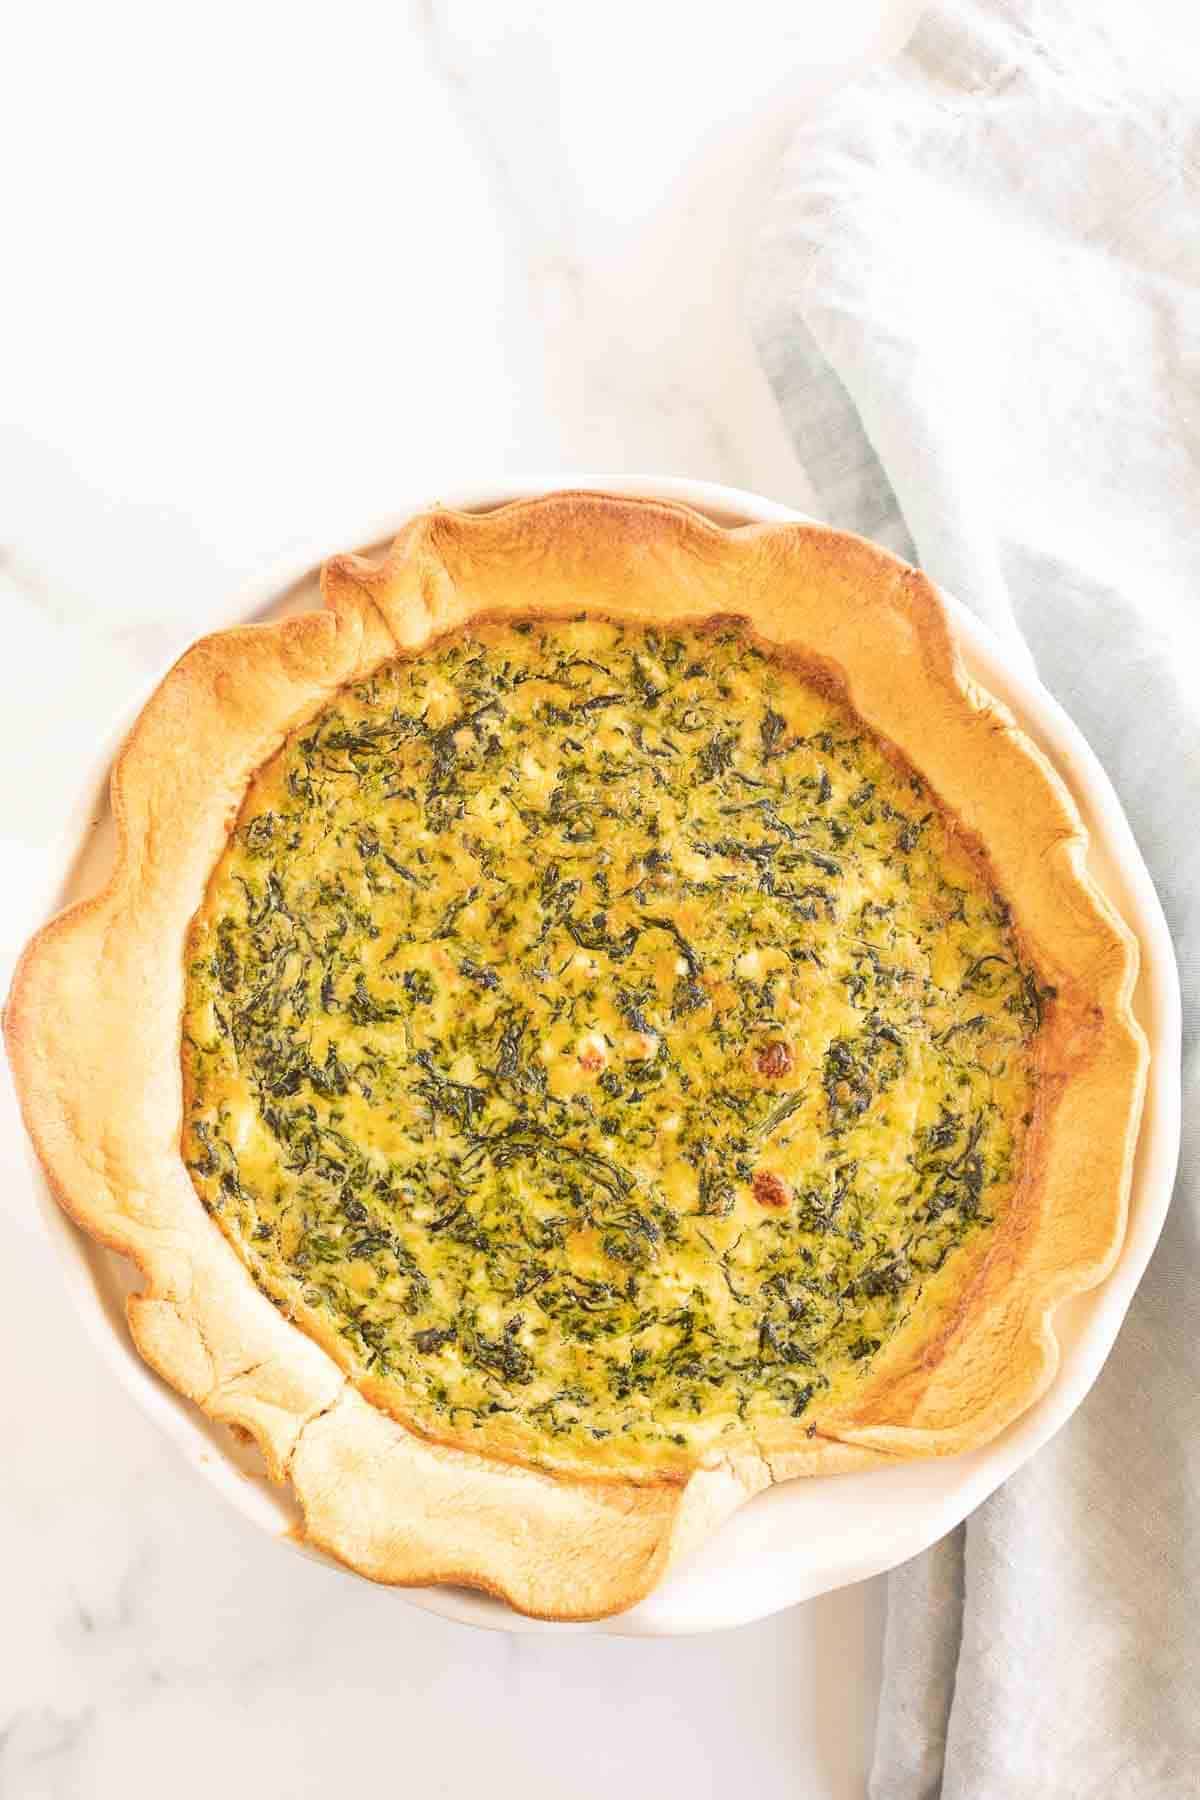 A small baked spinach quiche on a marble surface.